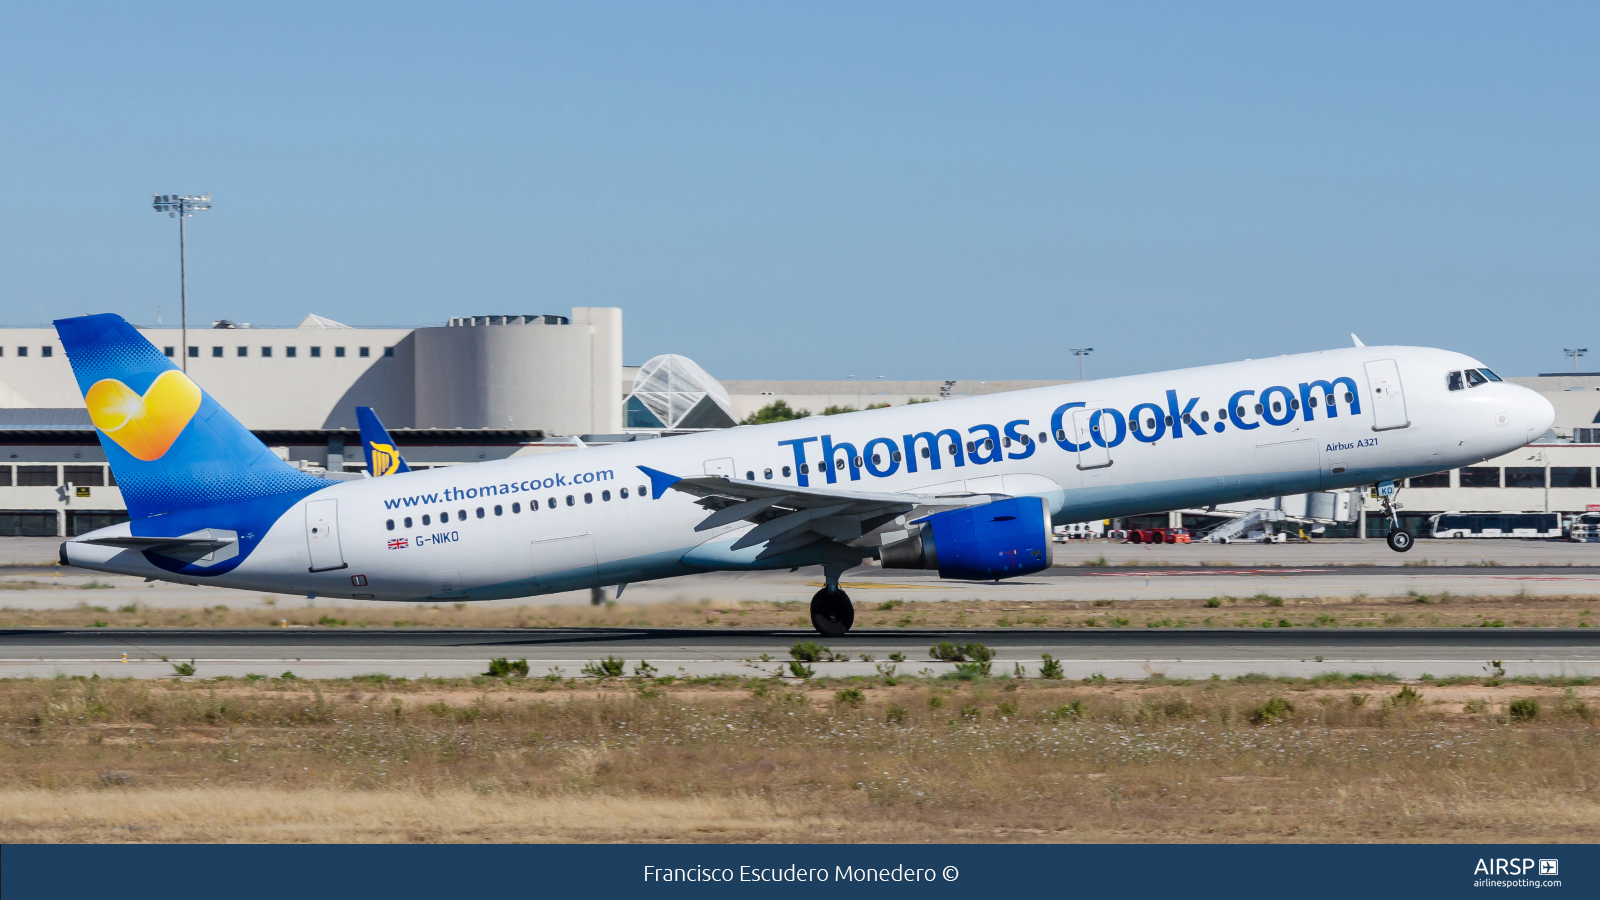 Thomas Cook Airlines  Airbus A321  G-NIKO